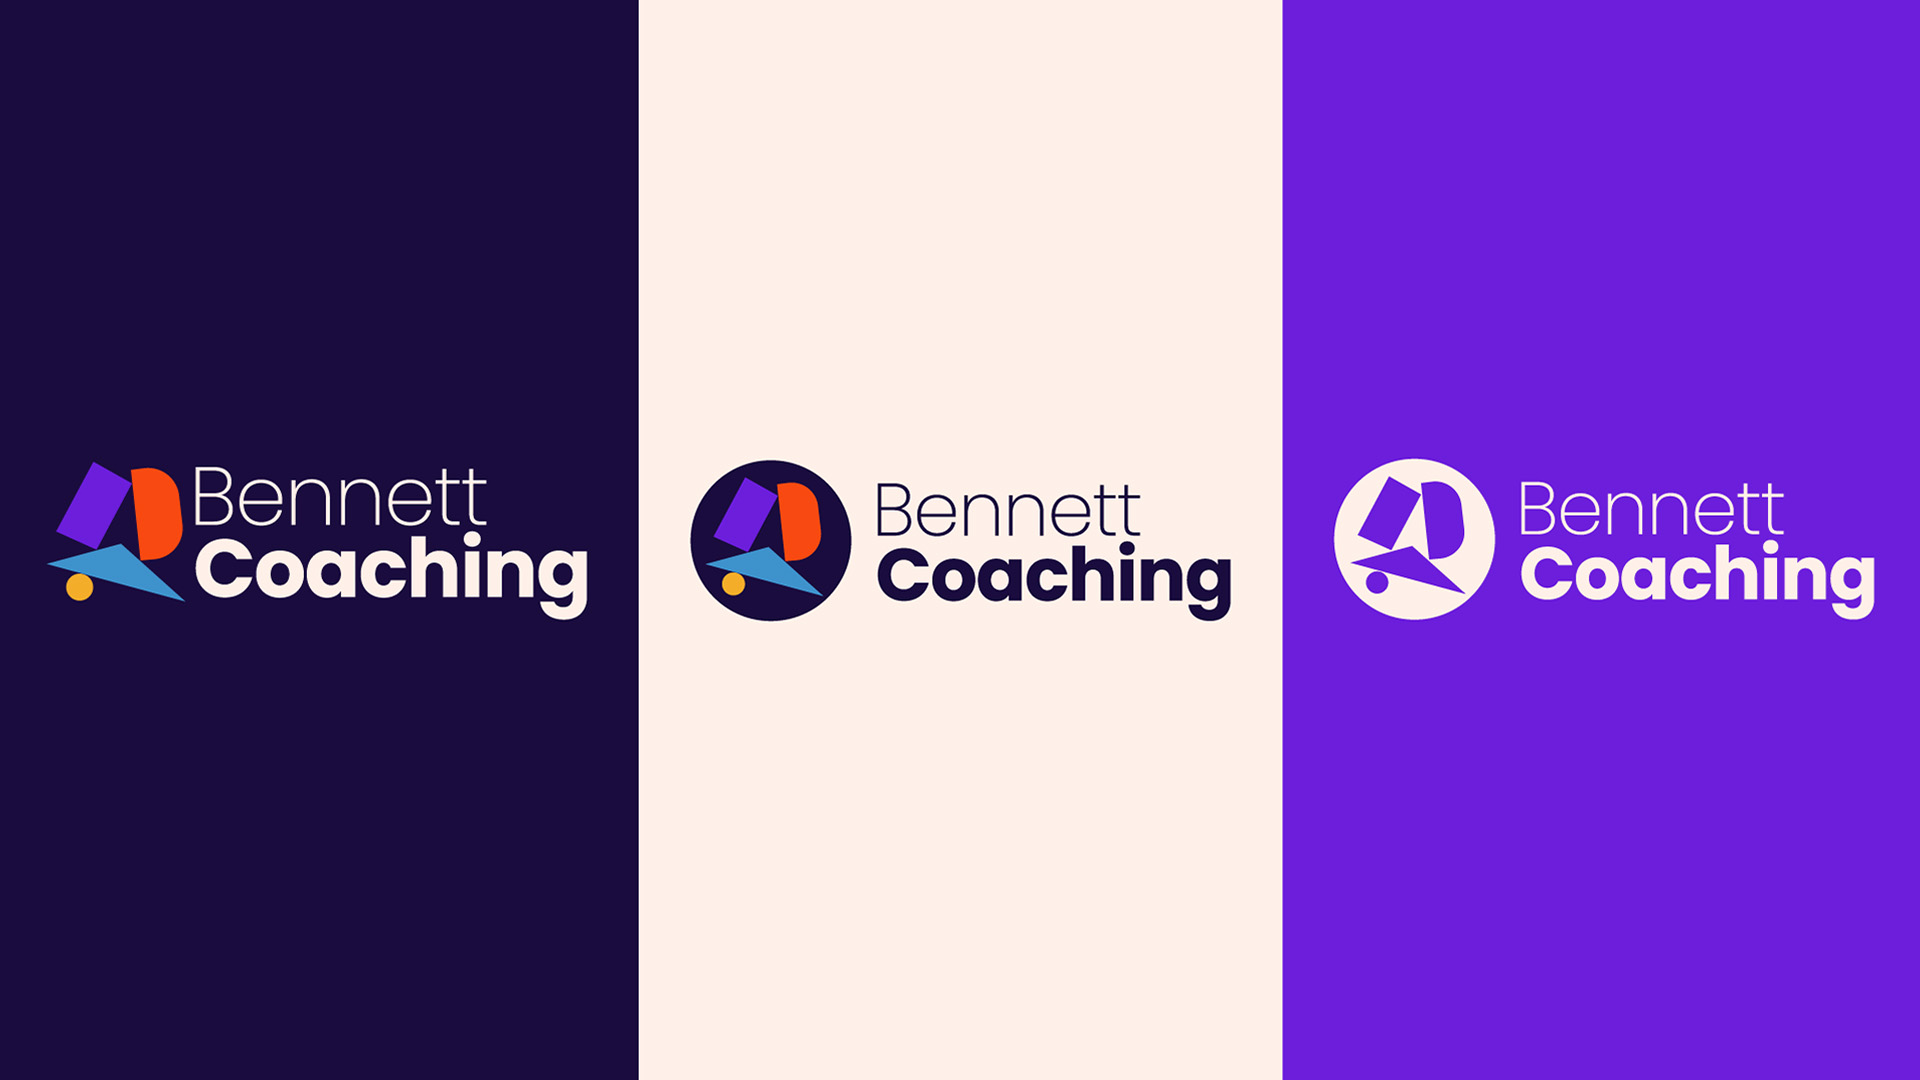 featured image two:Bennet Coaching Brand System